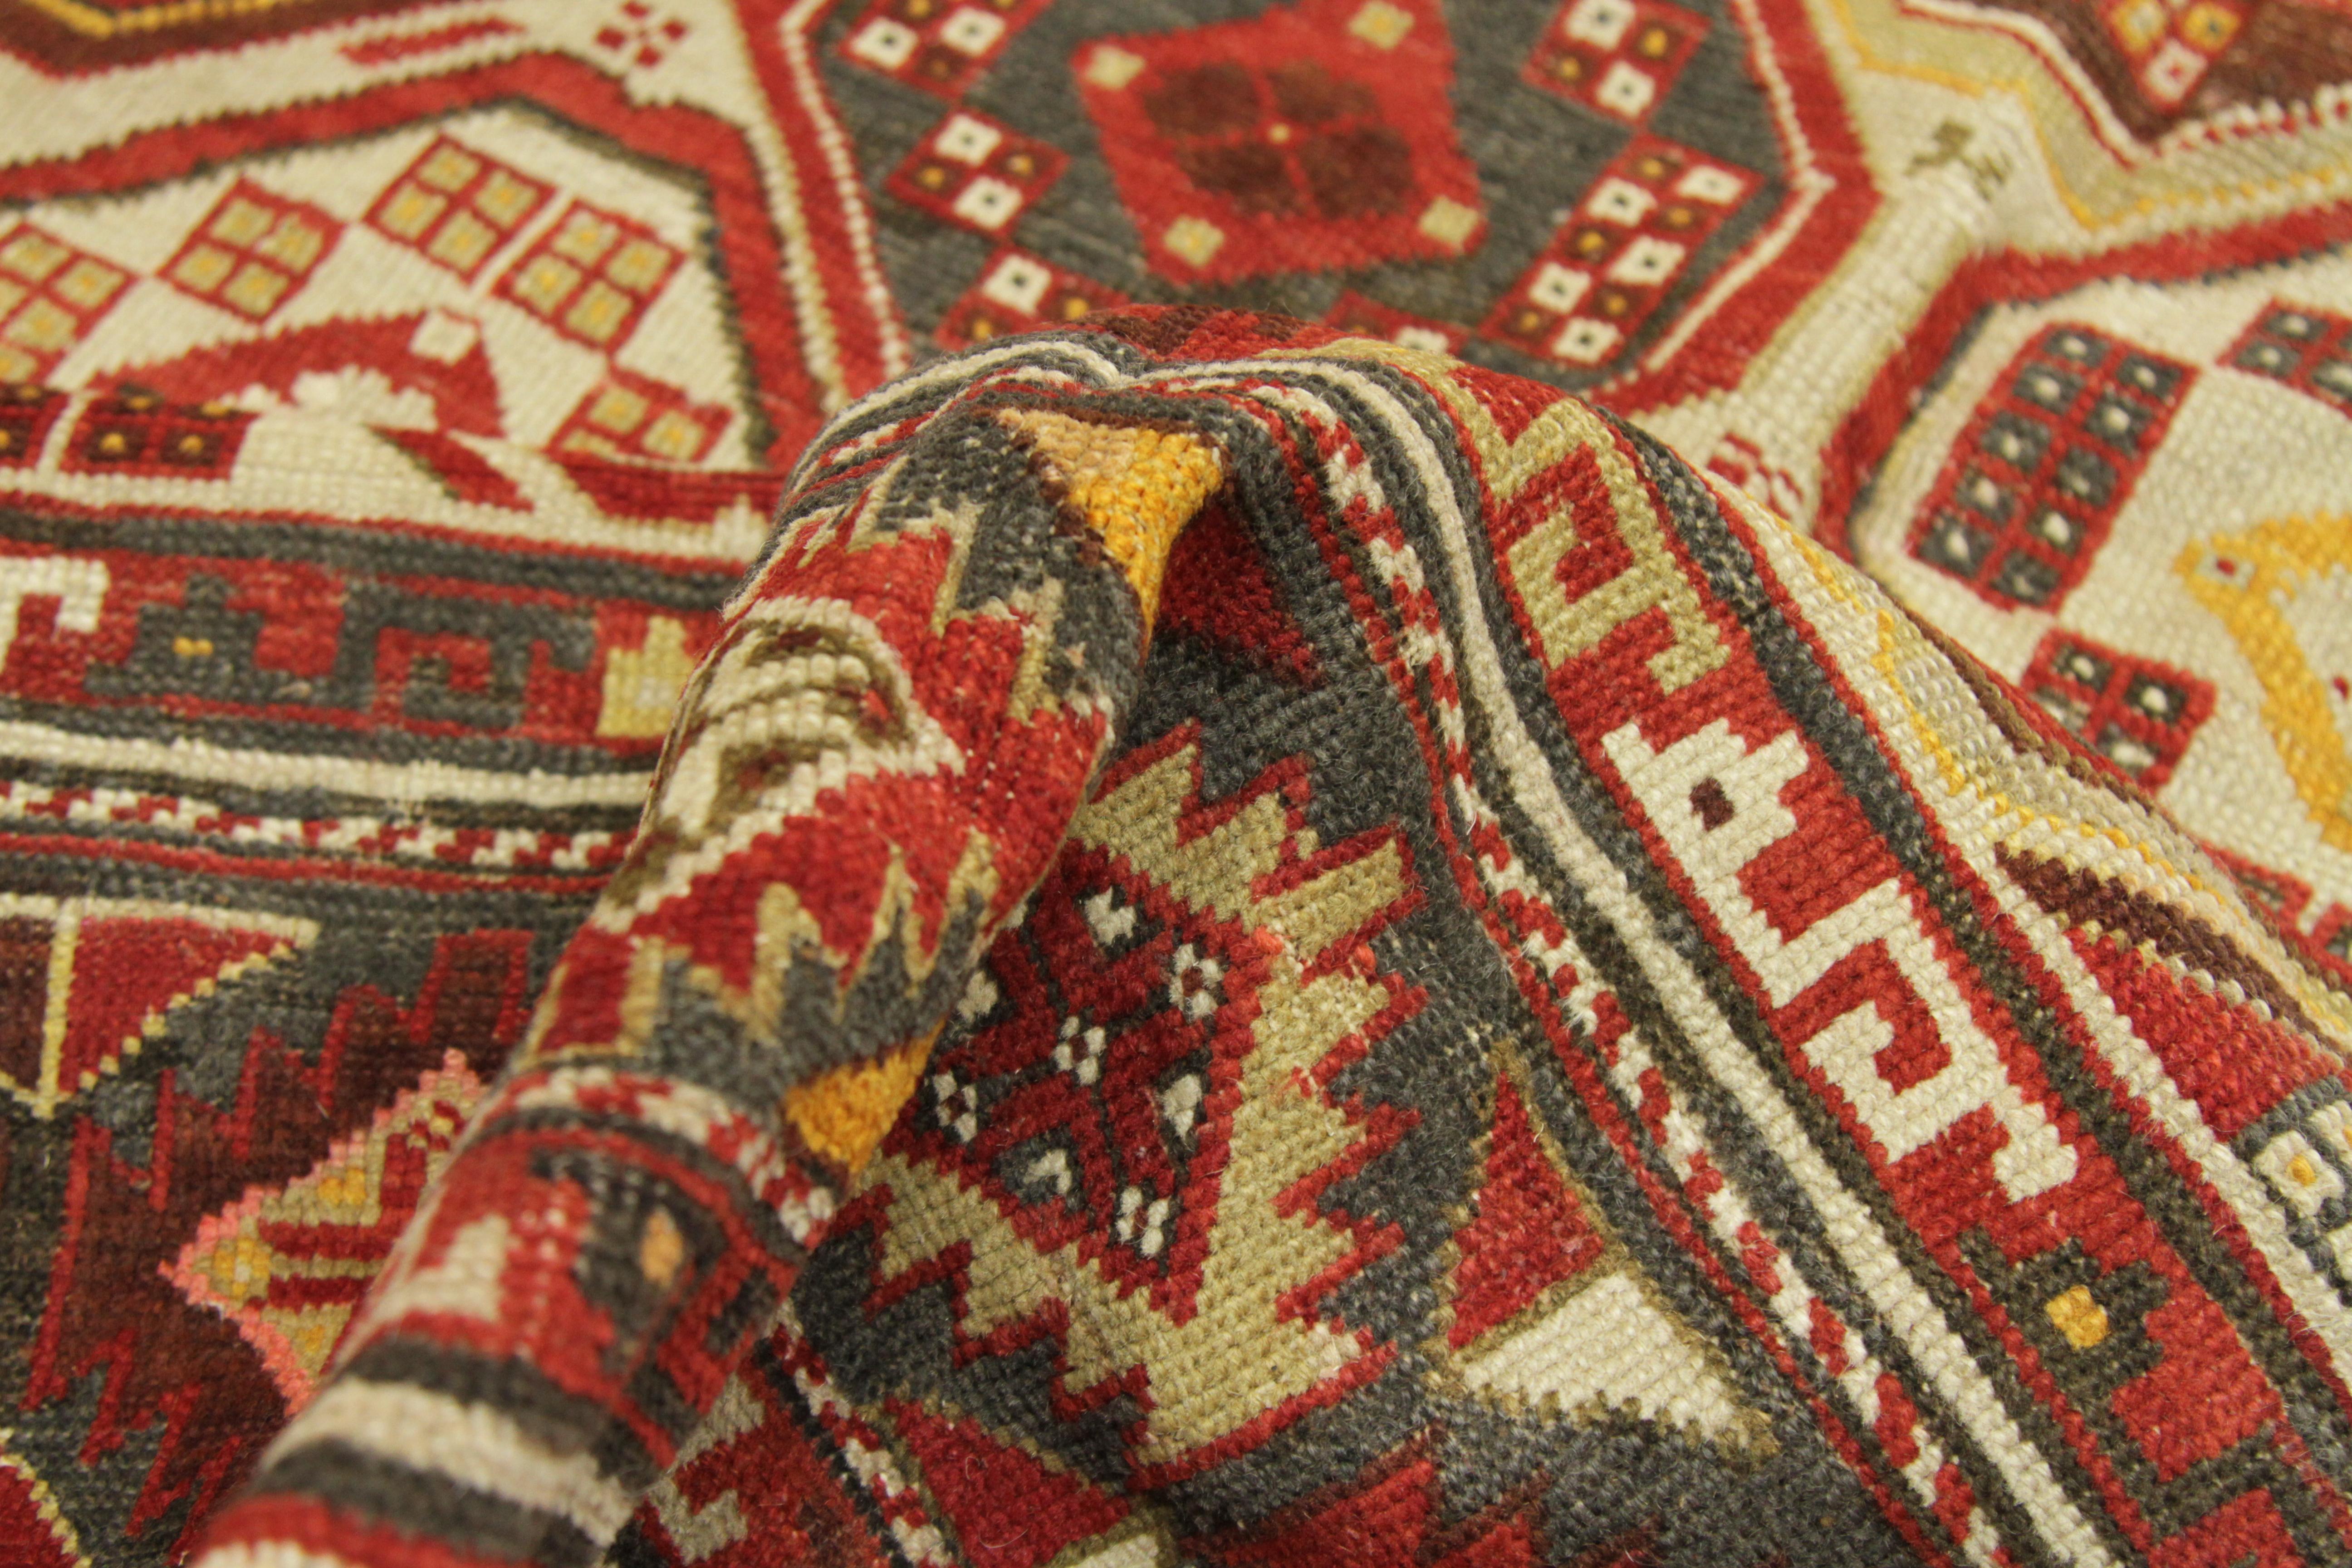 Antique Russian Rug Shirvan Style with Intricate Geometric Patterns, circa 1900s In Excellent Condition For Sale In Dallas, TX